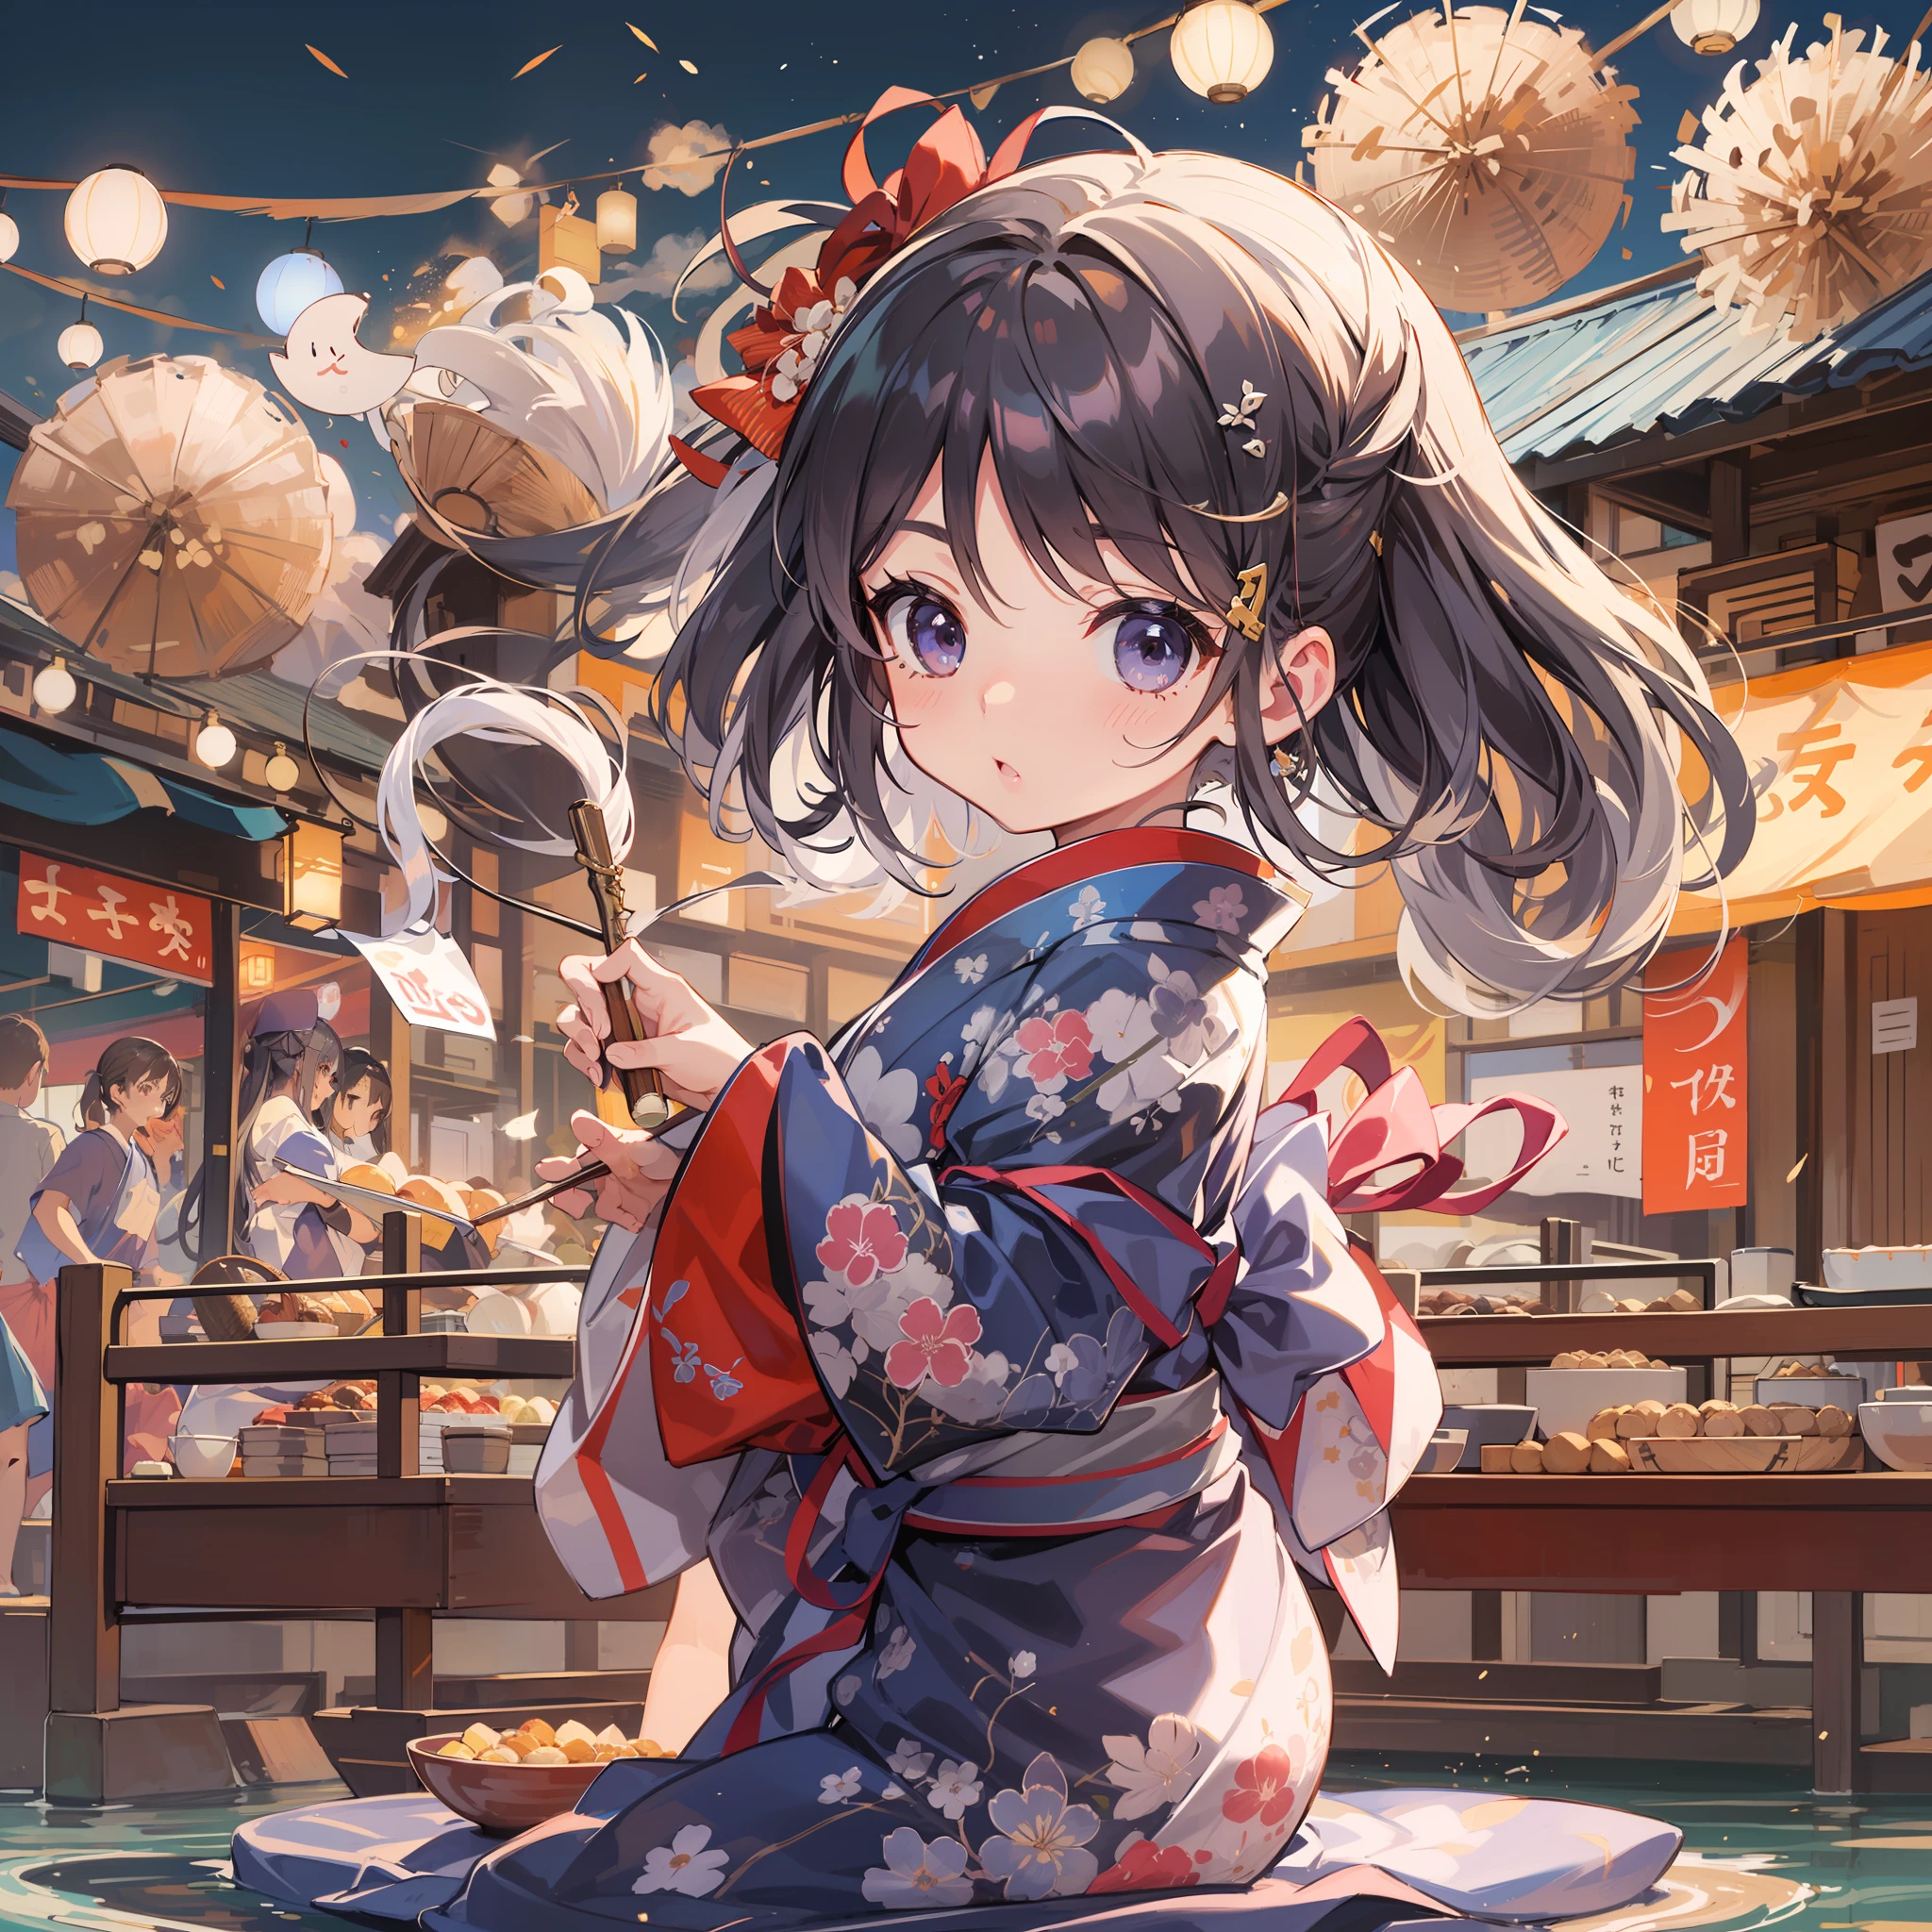 Chibi:1.5,Komono,Girl in Yukata,Blowing in the wind,Summer Festivals,natta,food stand,Spirit Stream,Big  Fireworks,poneyTail,(masutepiece: 1.3), (exquisite detailing: 1.2), Delicate and beautiful details, (Eye Detail), (Facial Detailed), (Highest Quality) :1.4), (Hyper-Resolution: 1.2), (very detailed illustration),Best Quality,depth of fields, Wide light, natural shadows